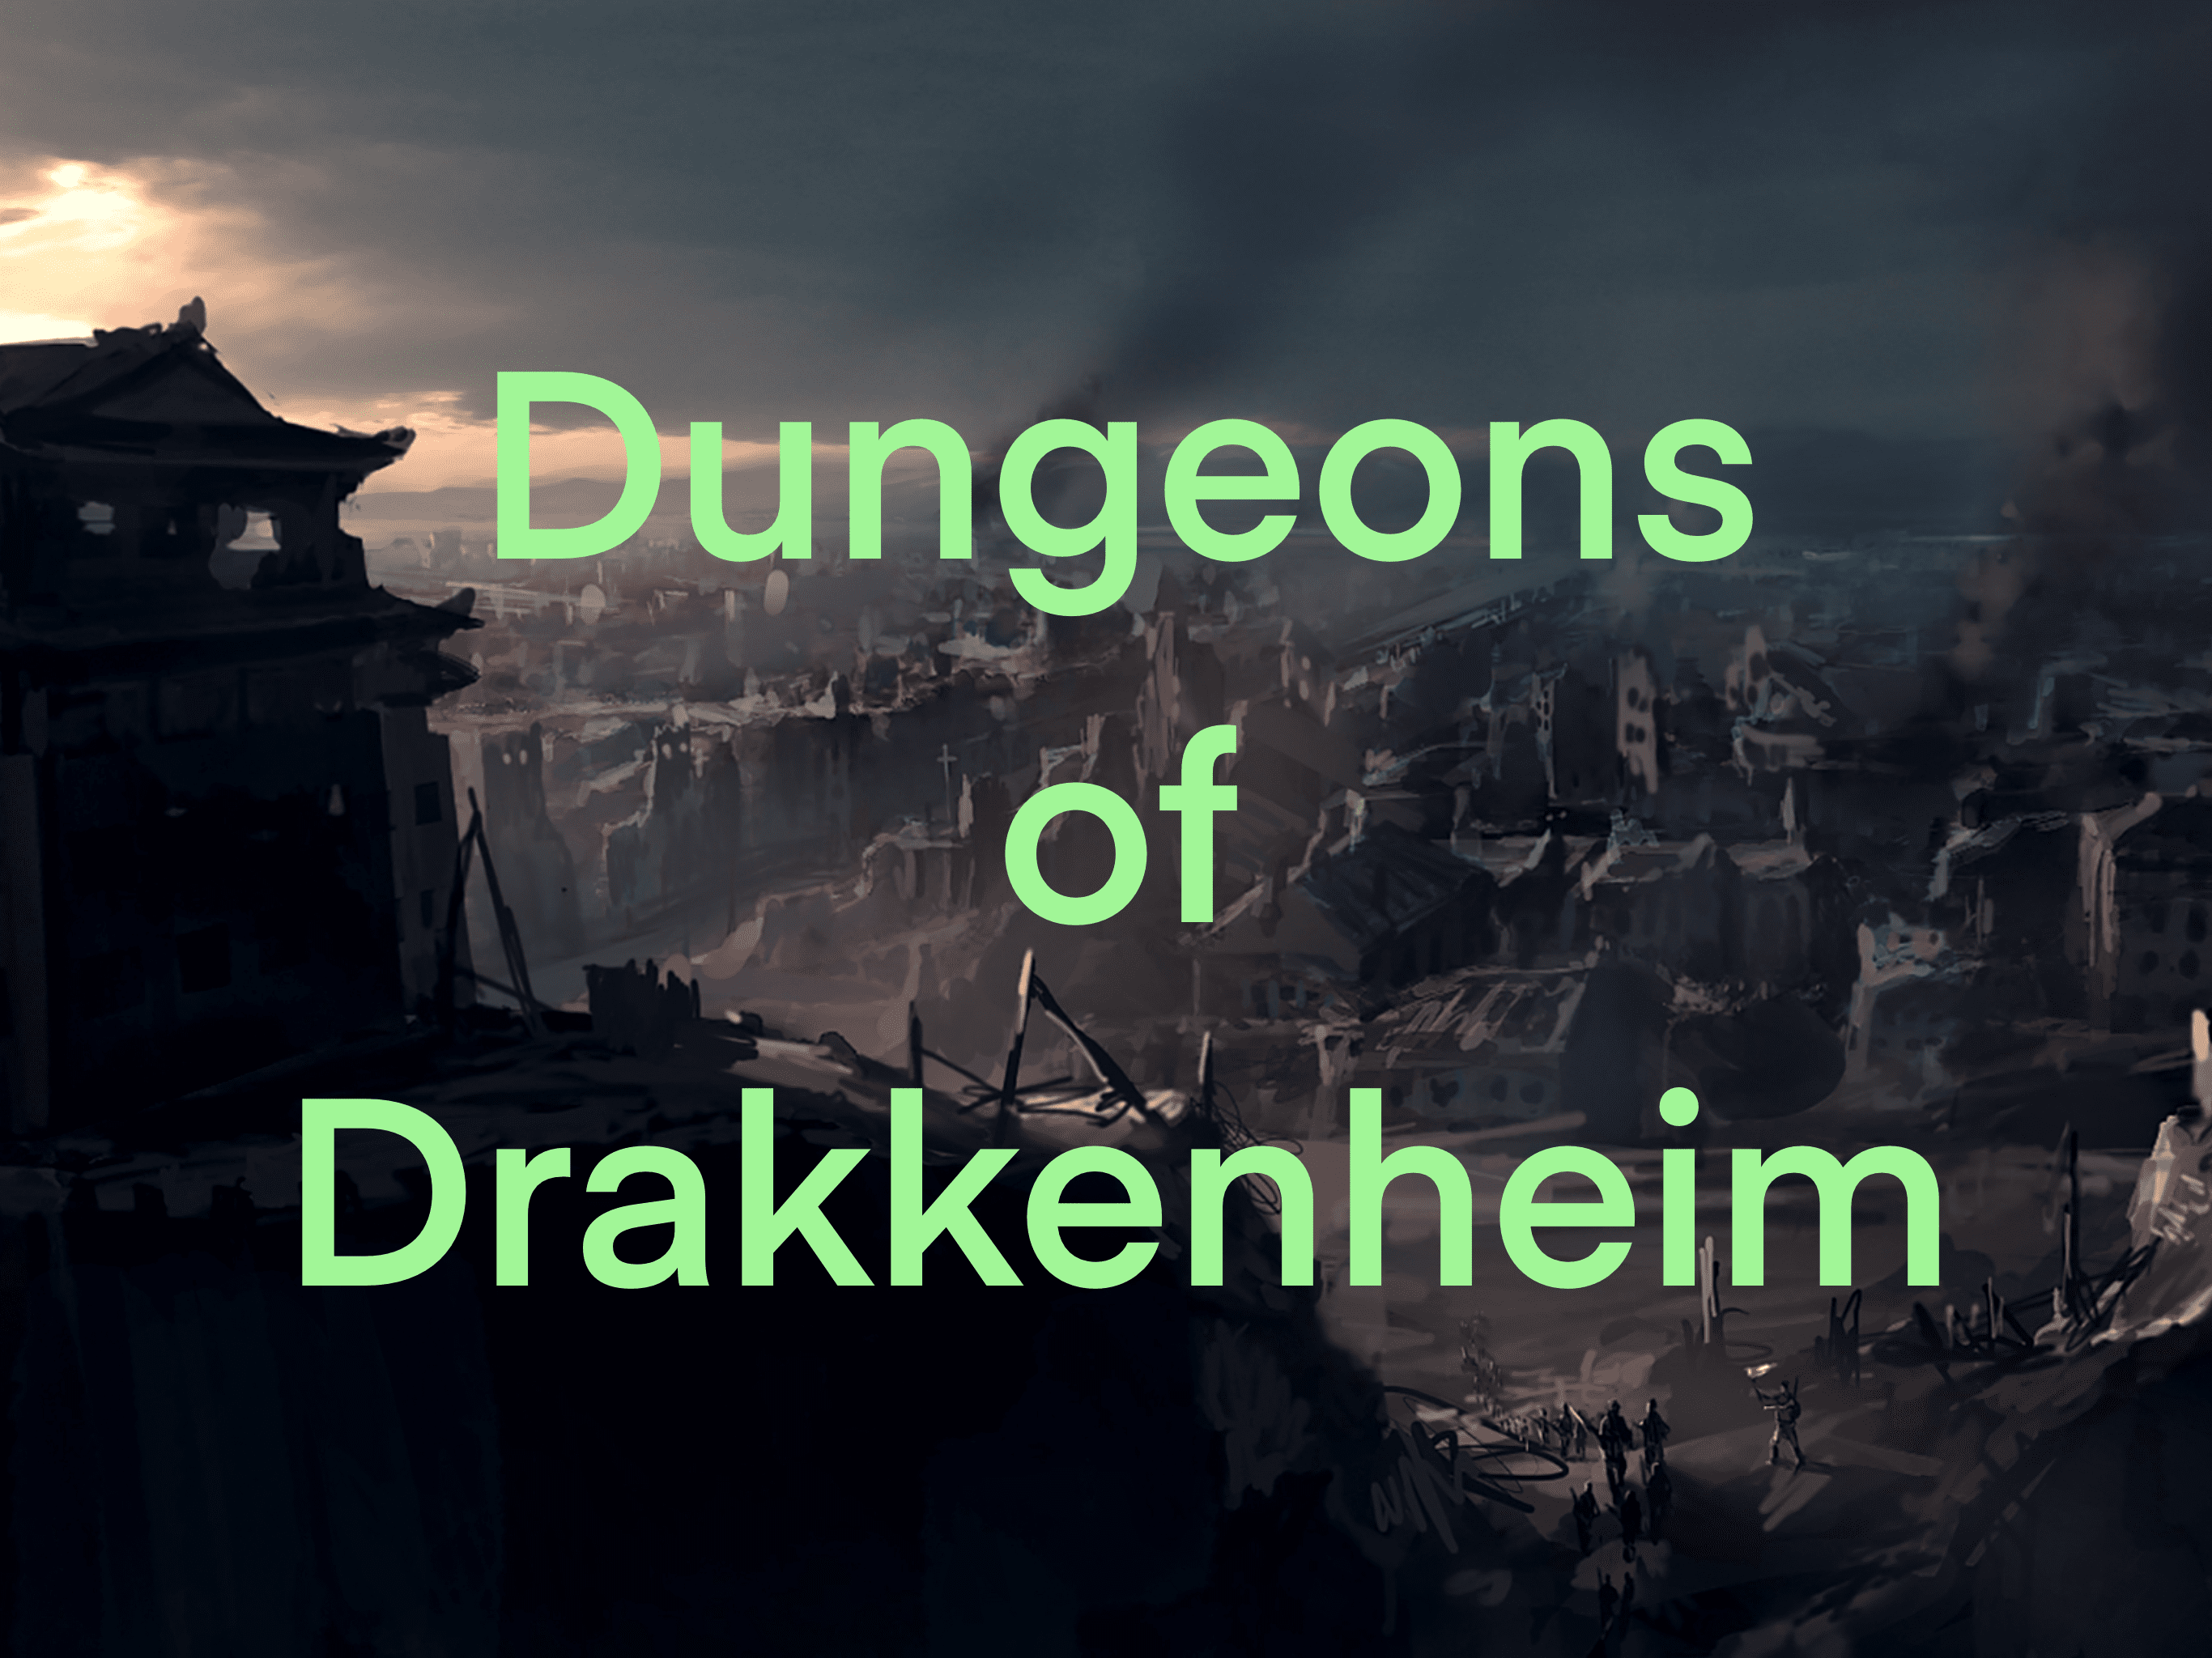  Dungeons of Drakkenhein: a character-driven campaign by the Dungeon Dudes (Asynchronous Play-by-Post)